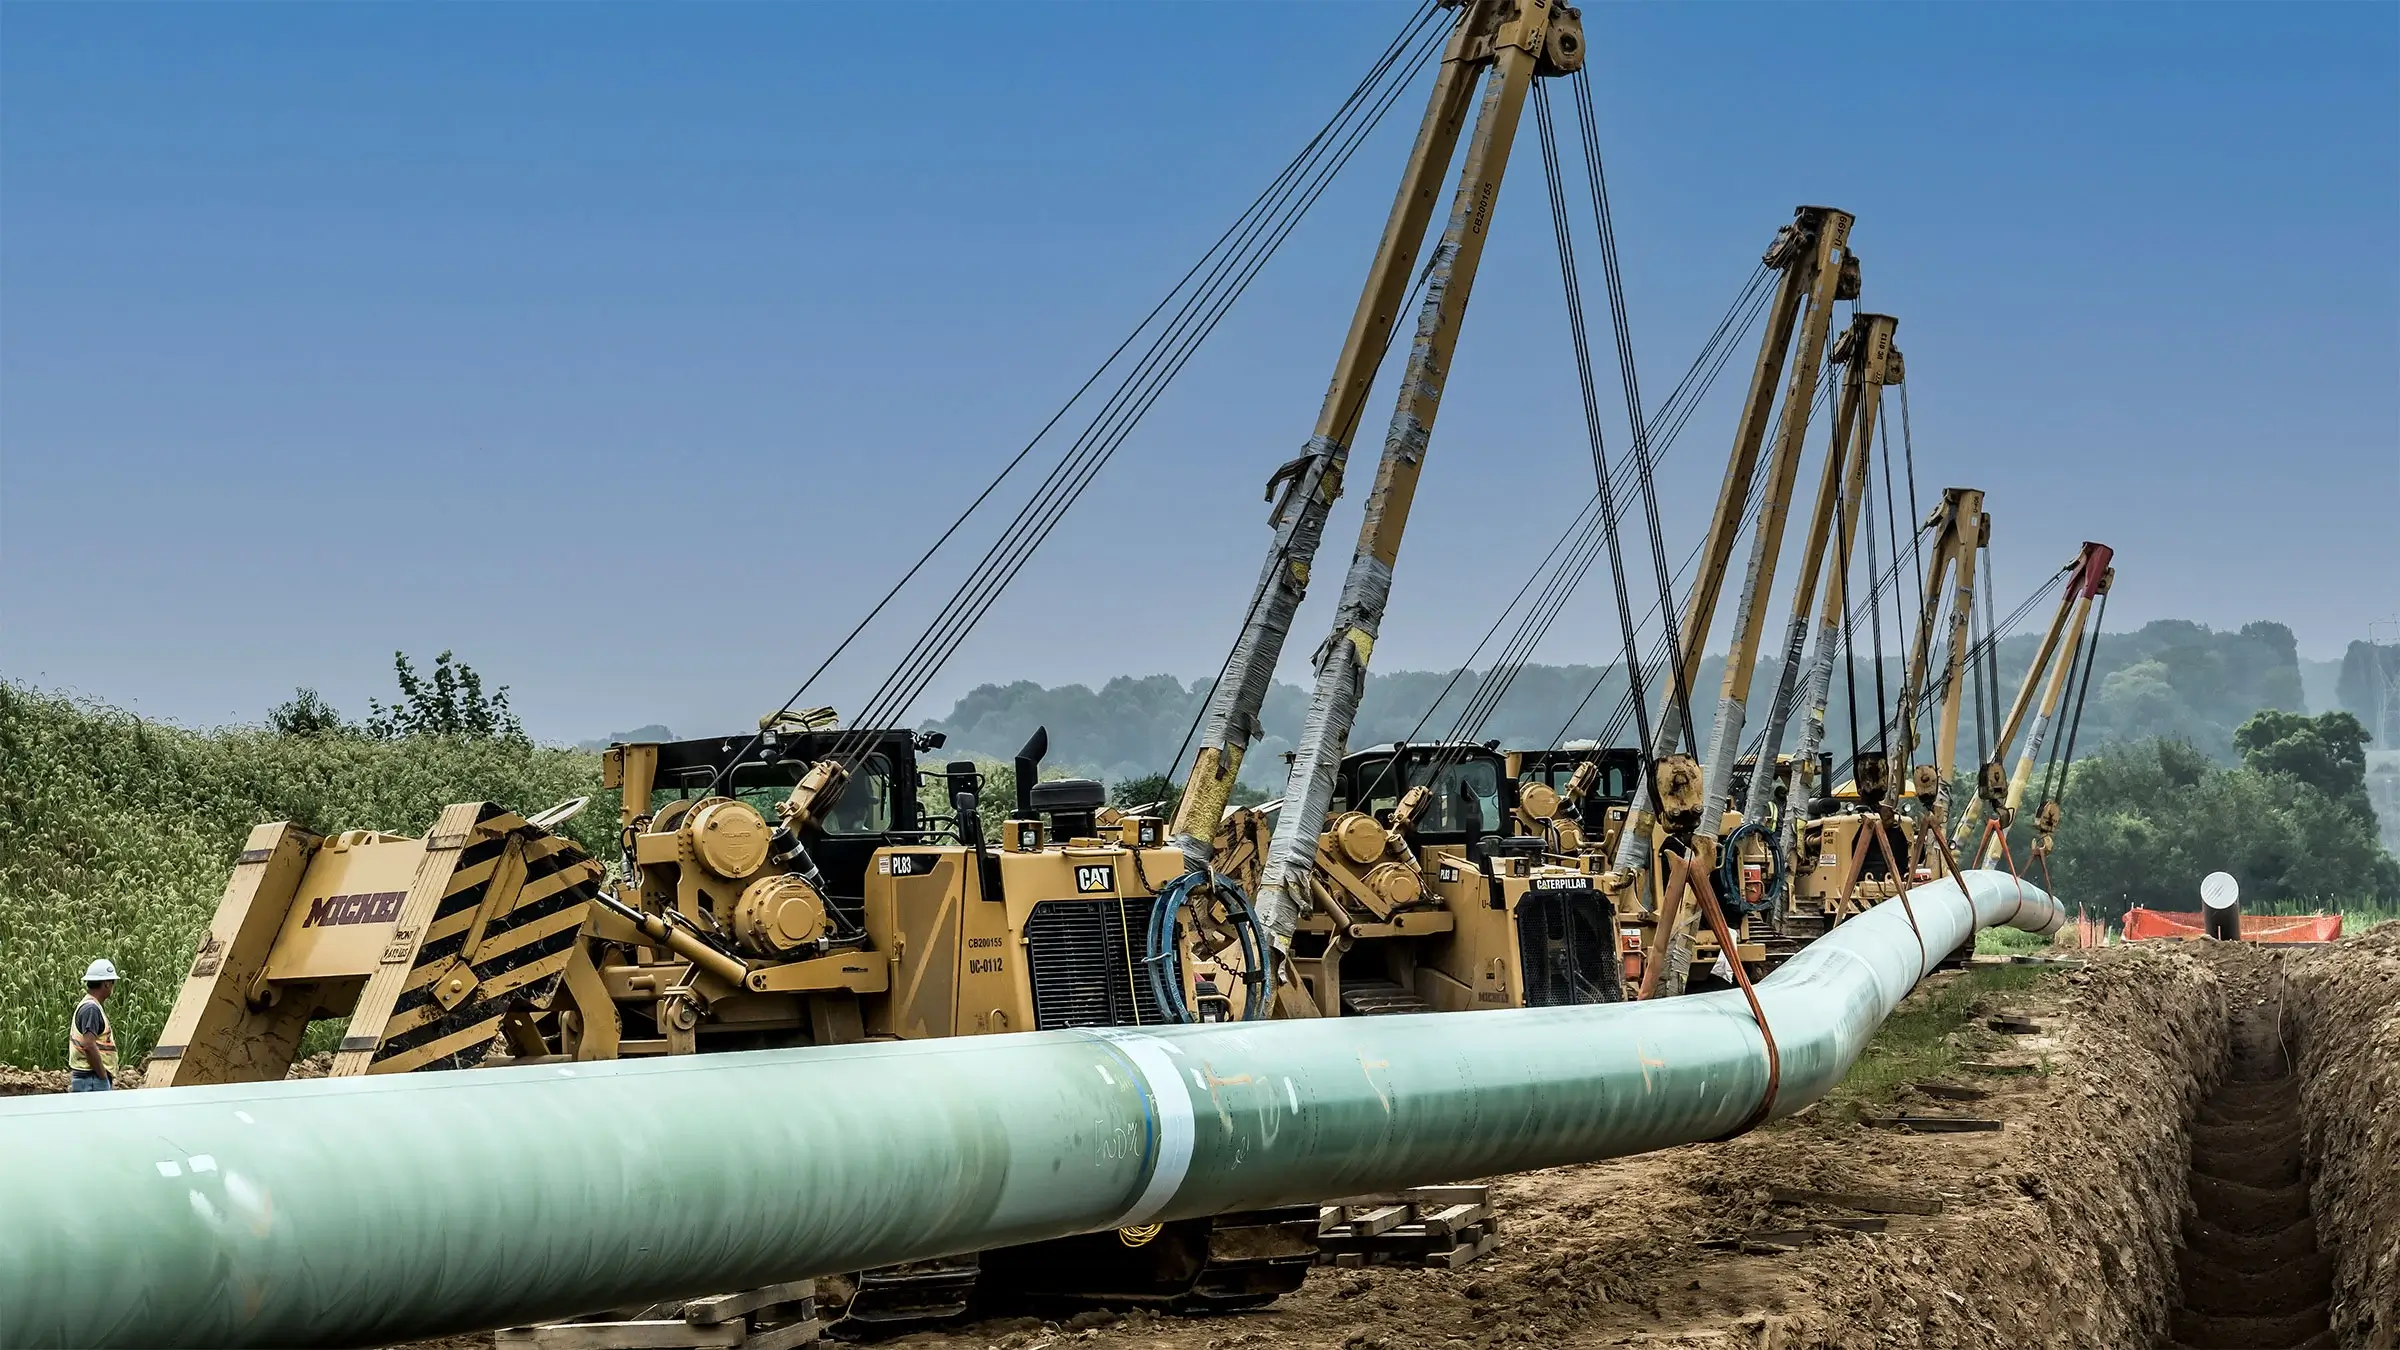 A Michels Pipeline crew prepares to lower a section of pipe into a trench